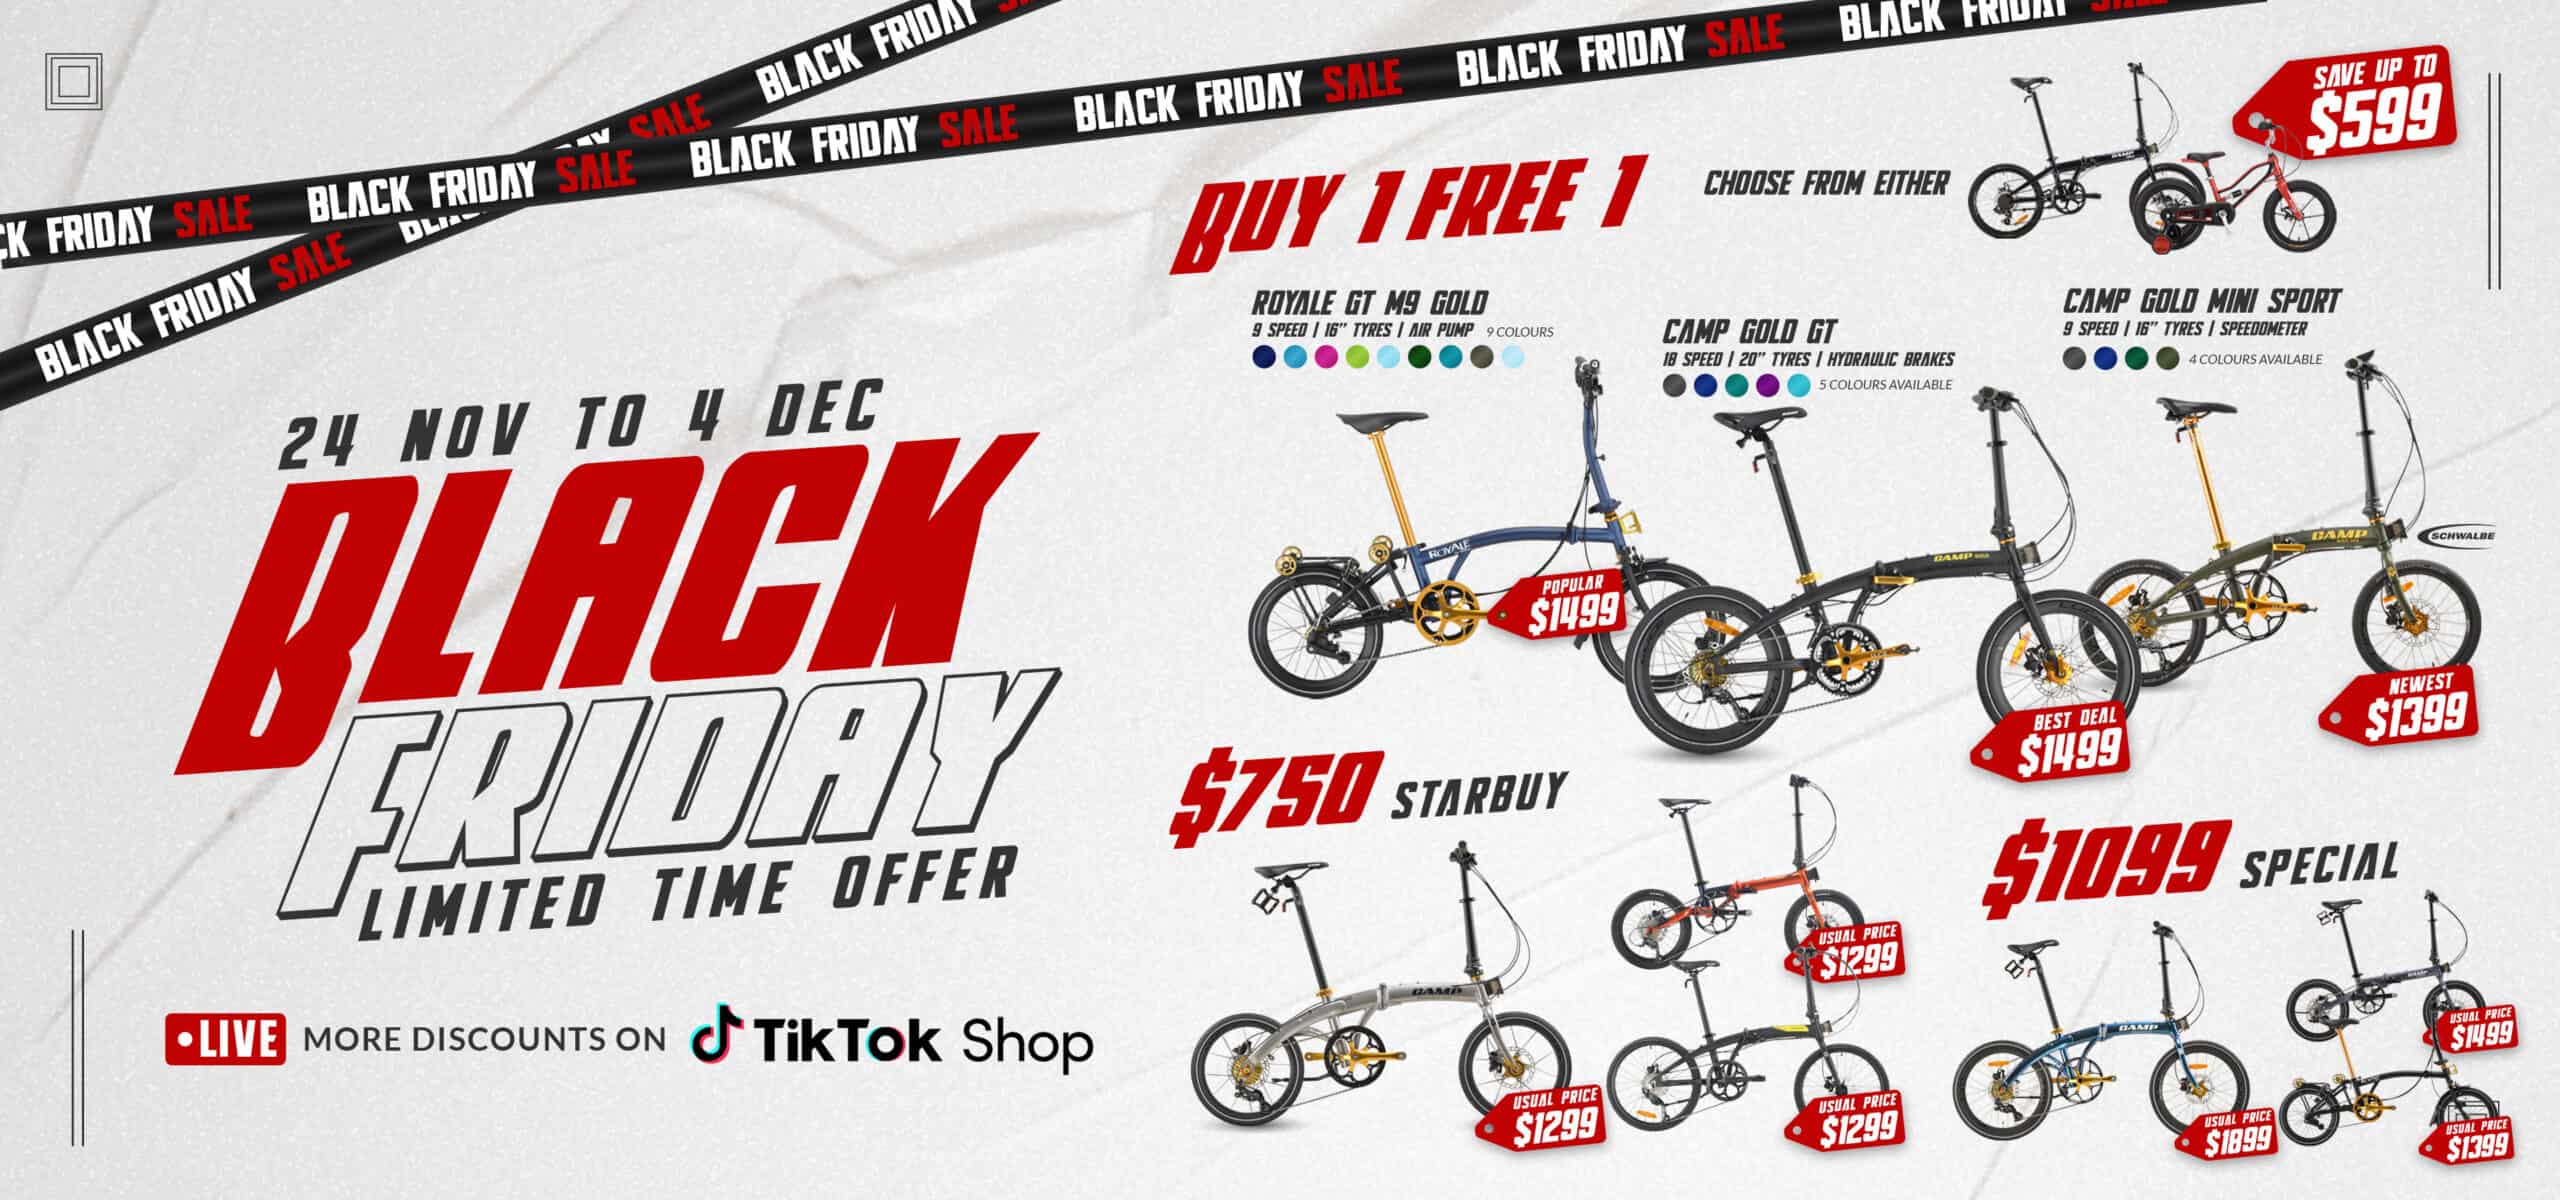 MOBOT Black Friday Web Banner 3840x1800 1 scaled - Home